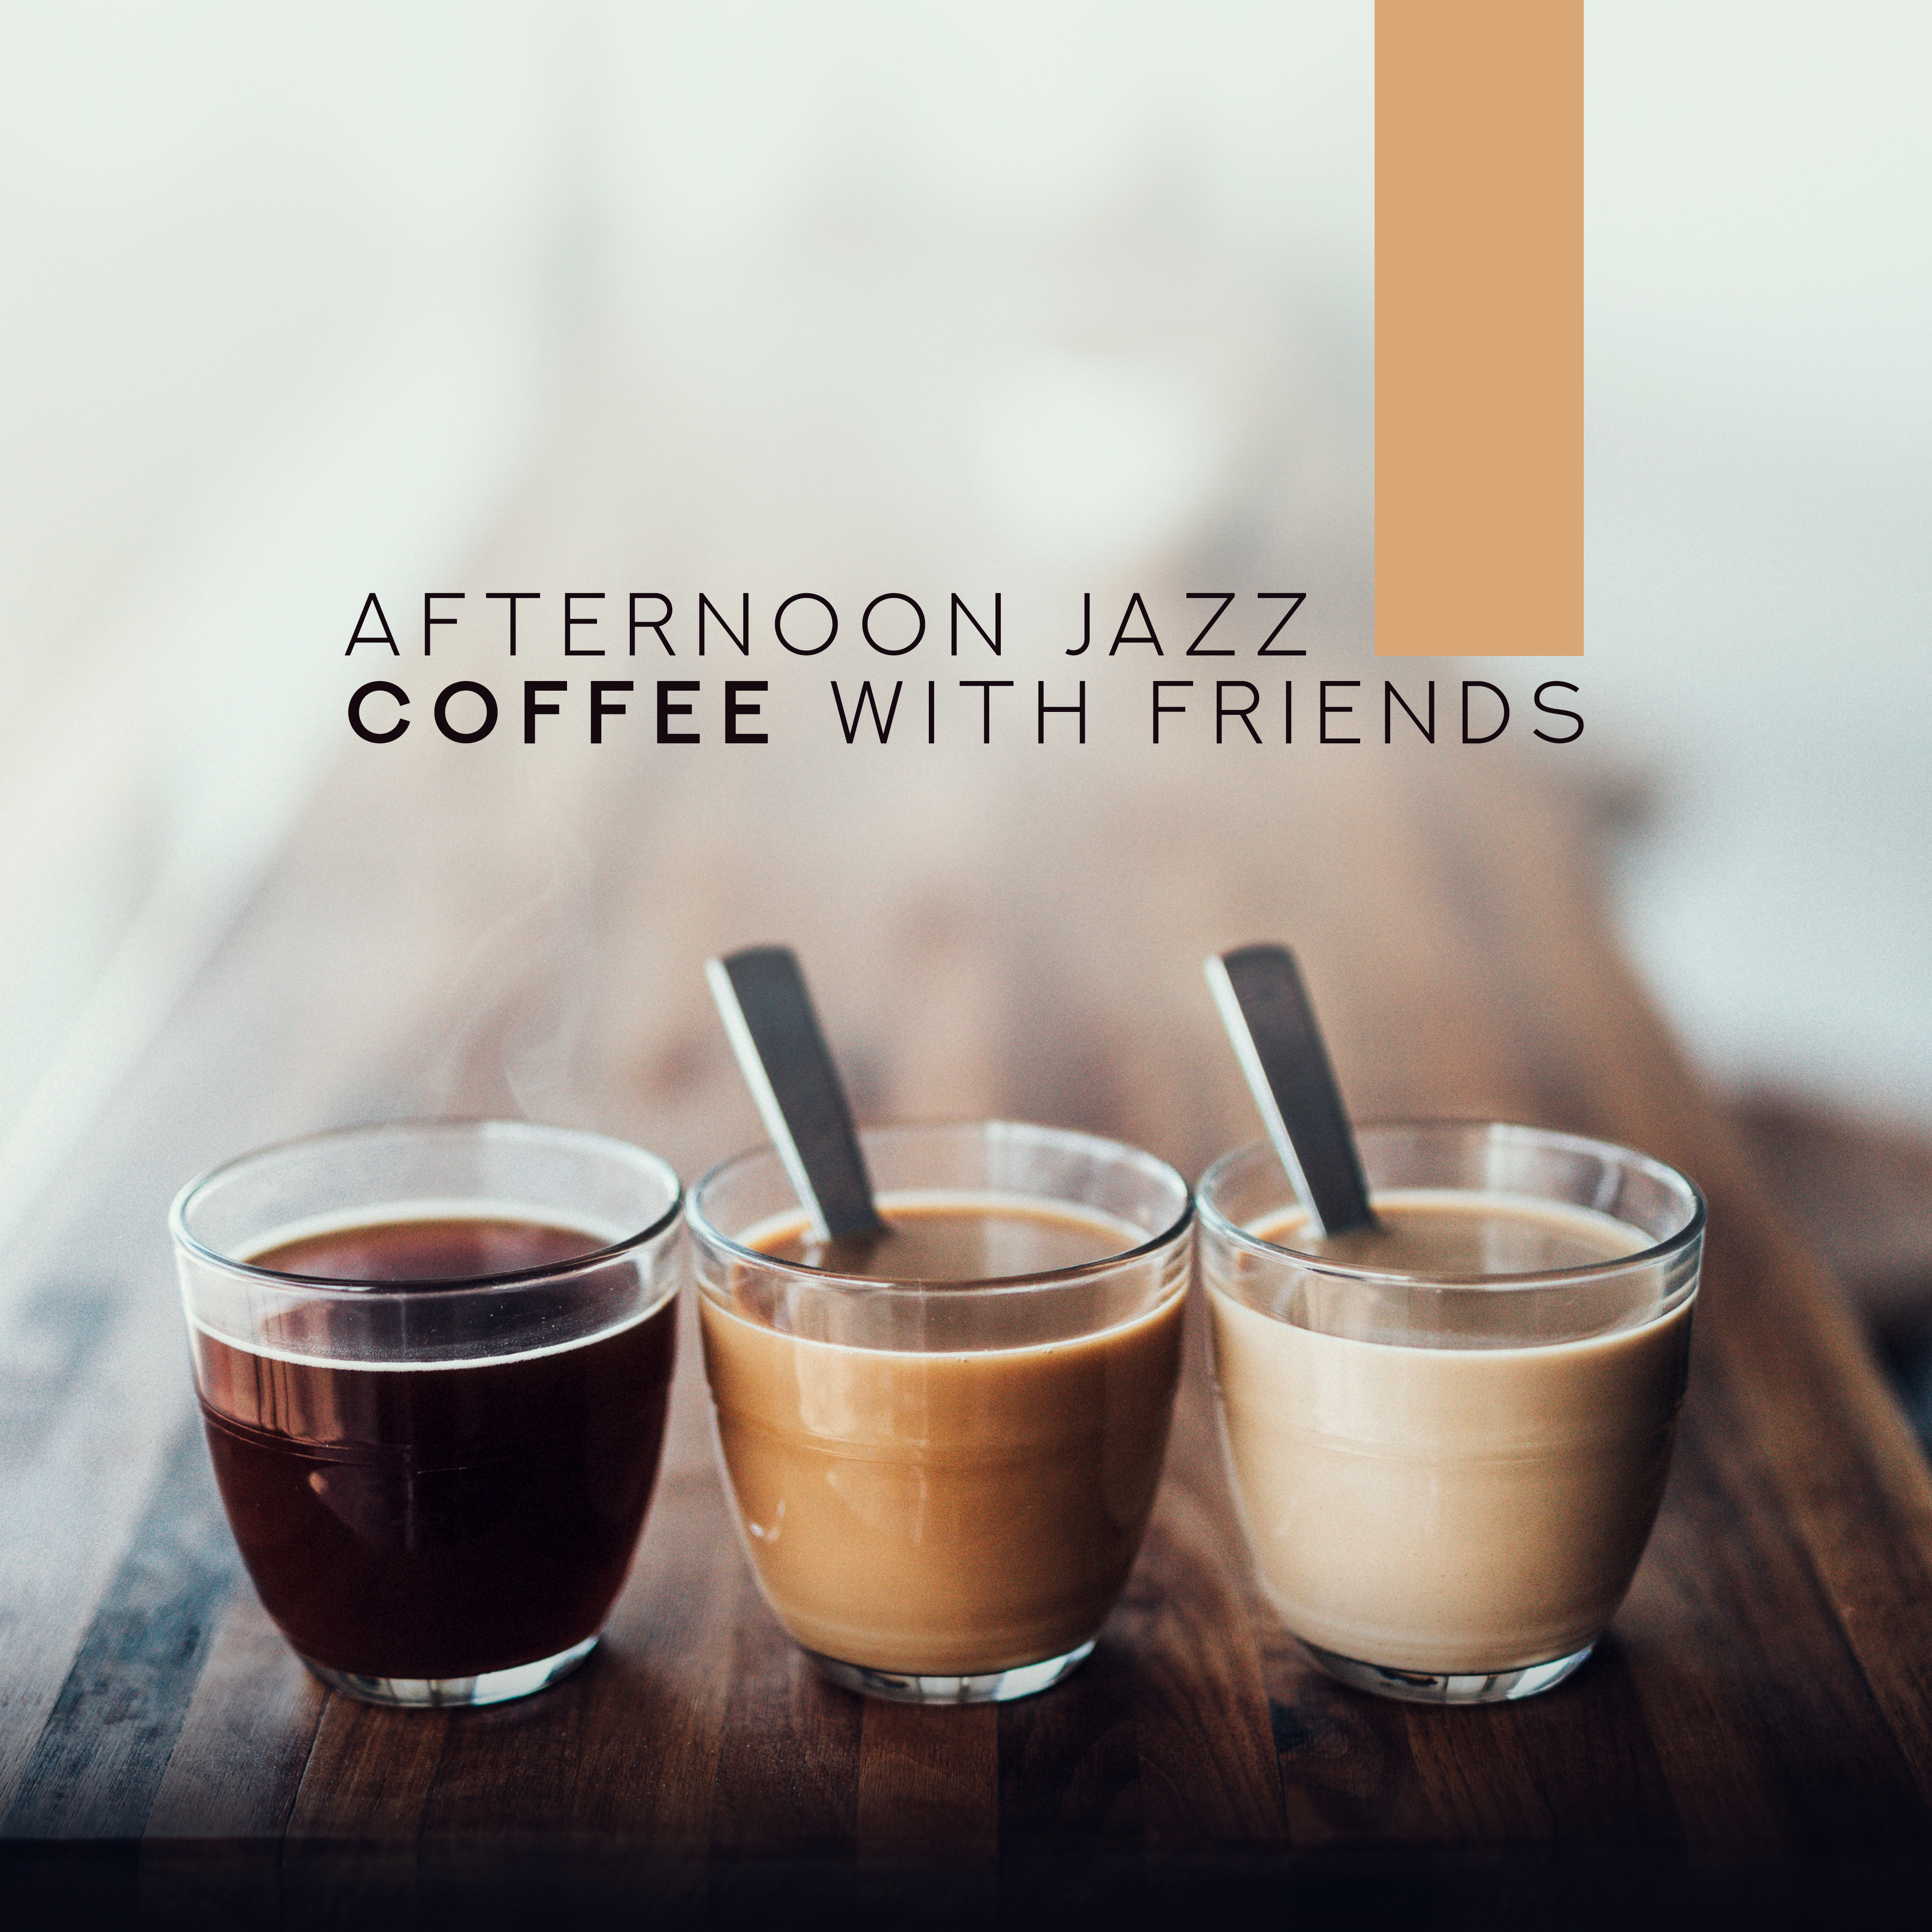 Afternoon Jazz Coffee with Friends – Background Smooth Music for Great Meeting Atmosphere